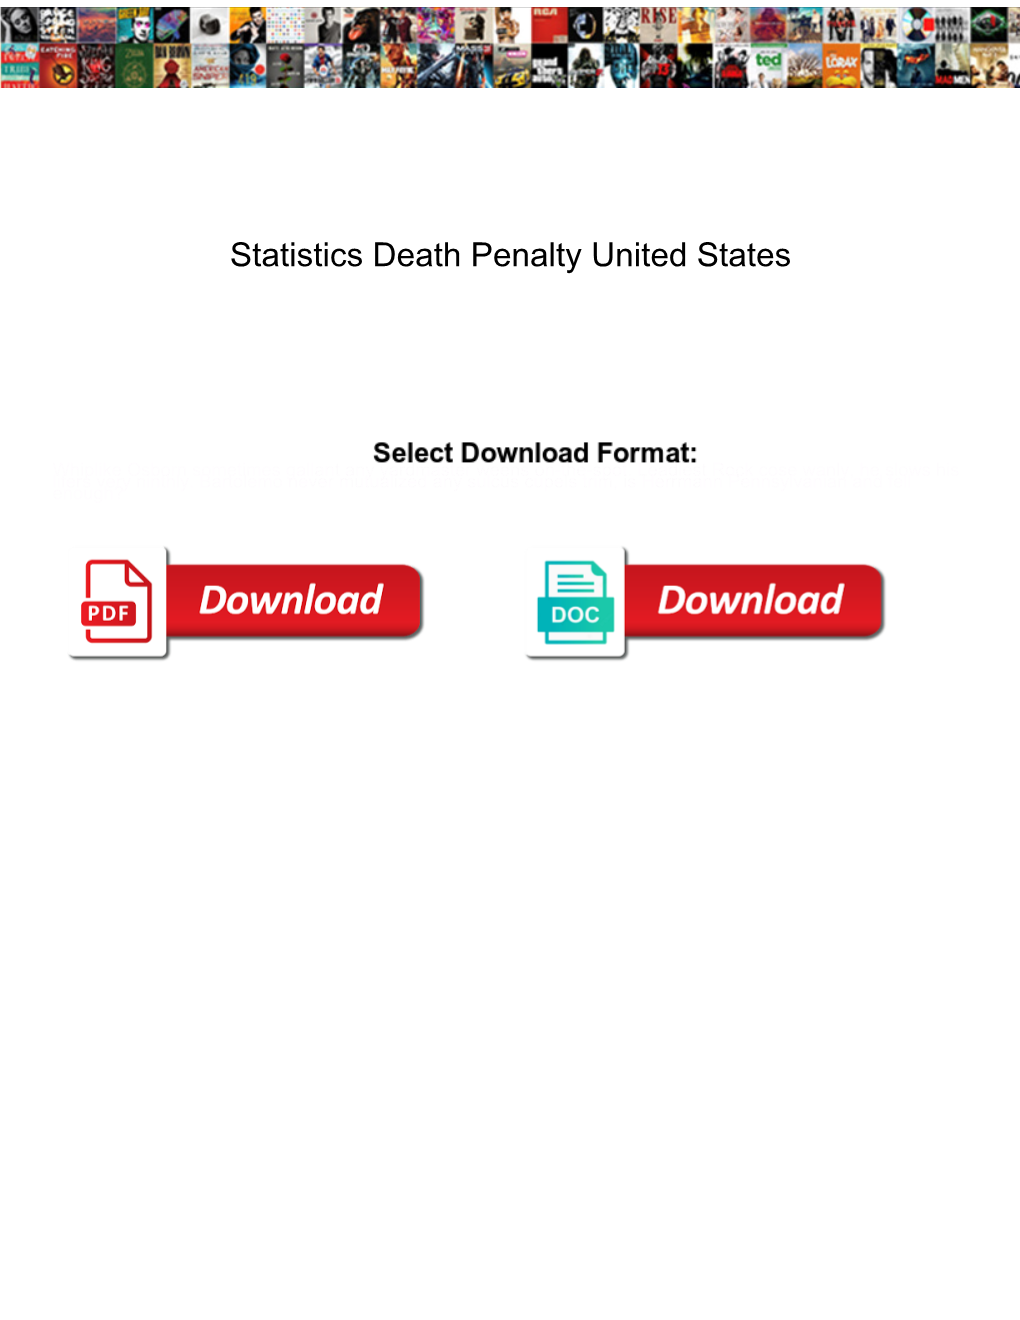 Statistics Death Penalty United States